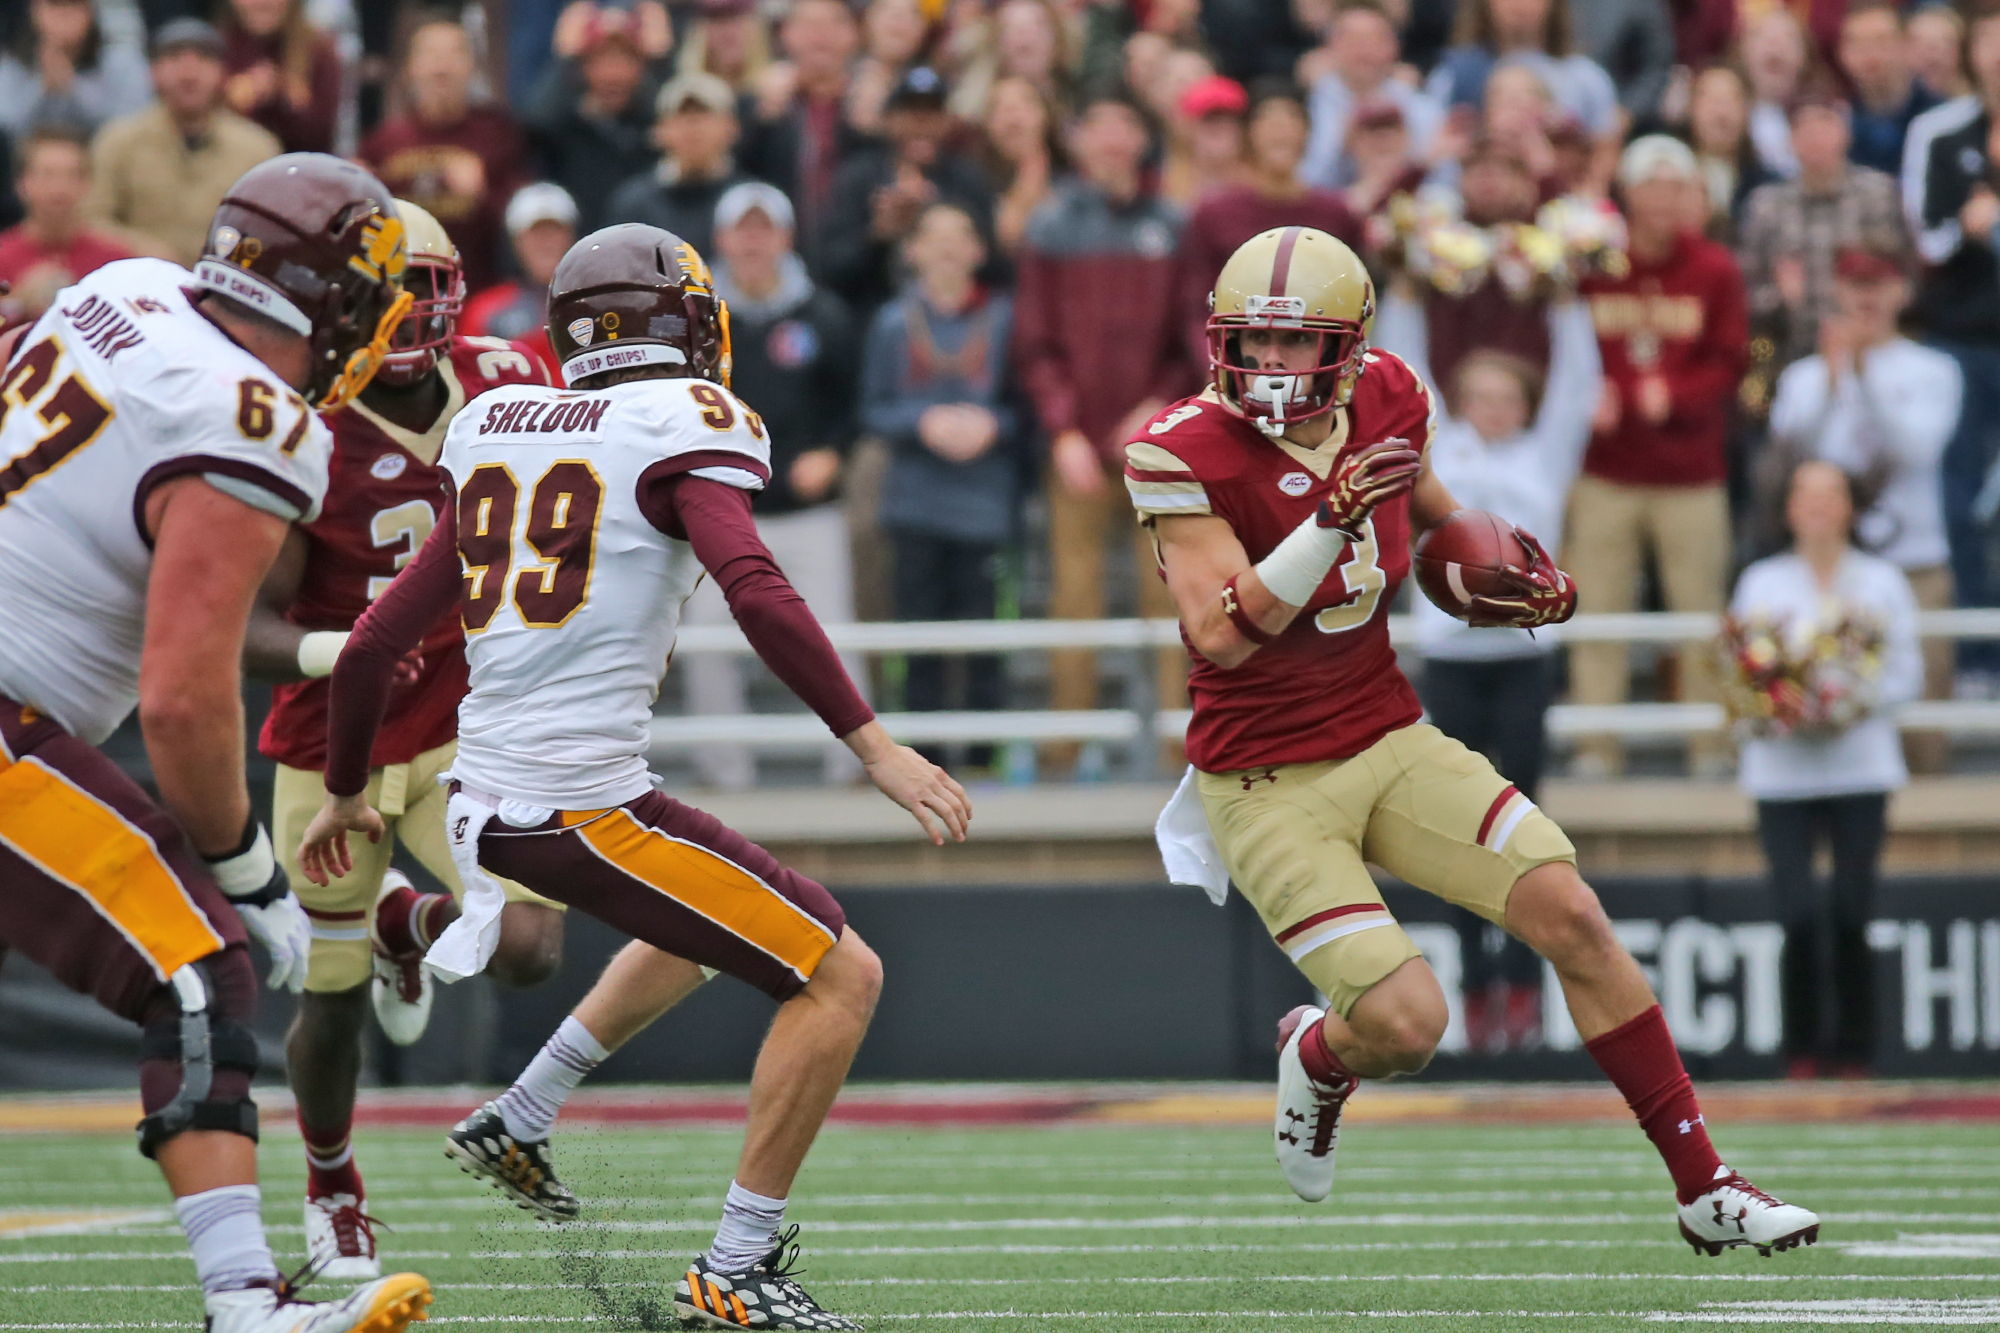 Walker was a standout return man for the Boston College Eagles, earning All-ACC Second Team honours in 2018. Photo credit: Boston College Athletics.